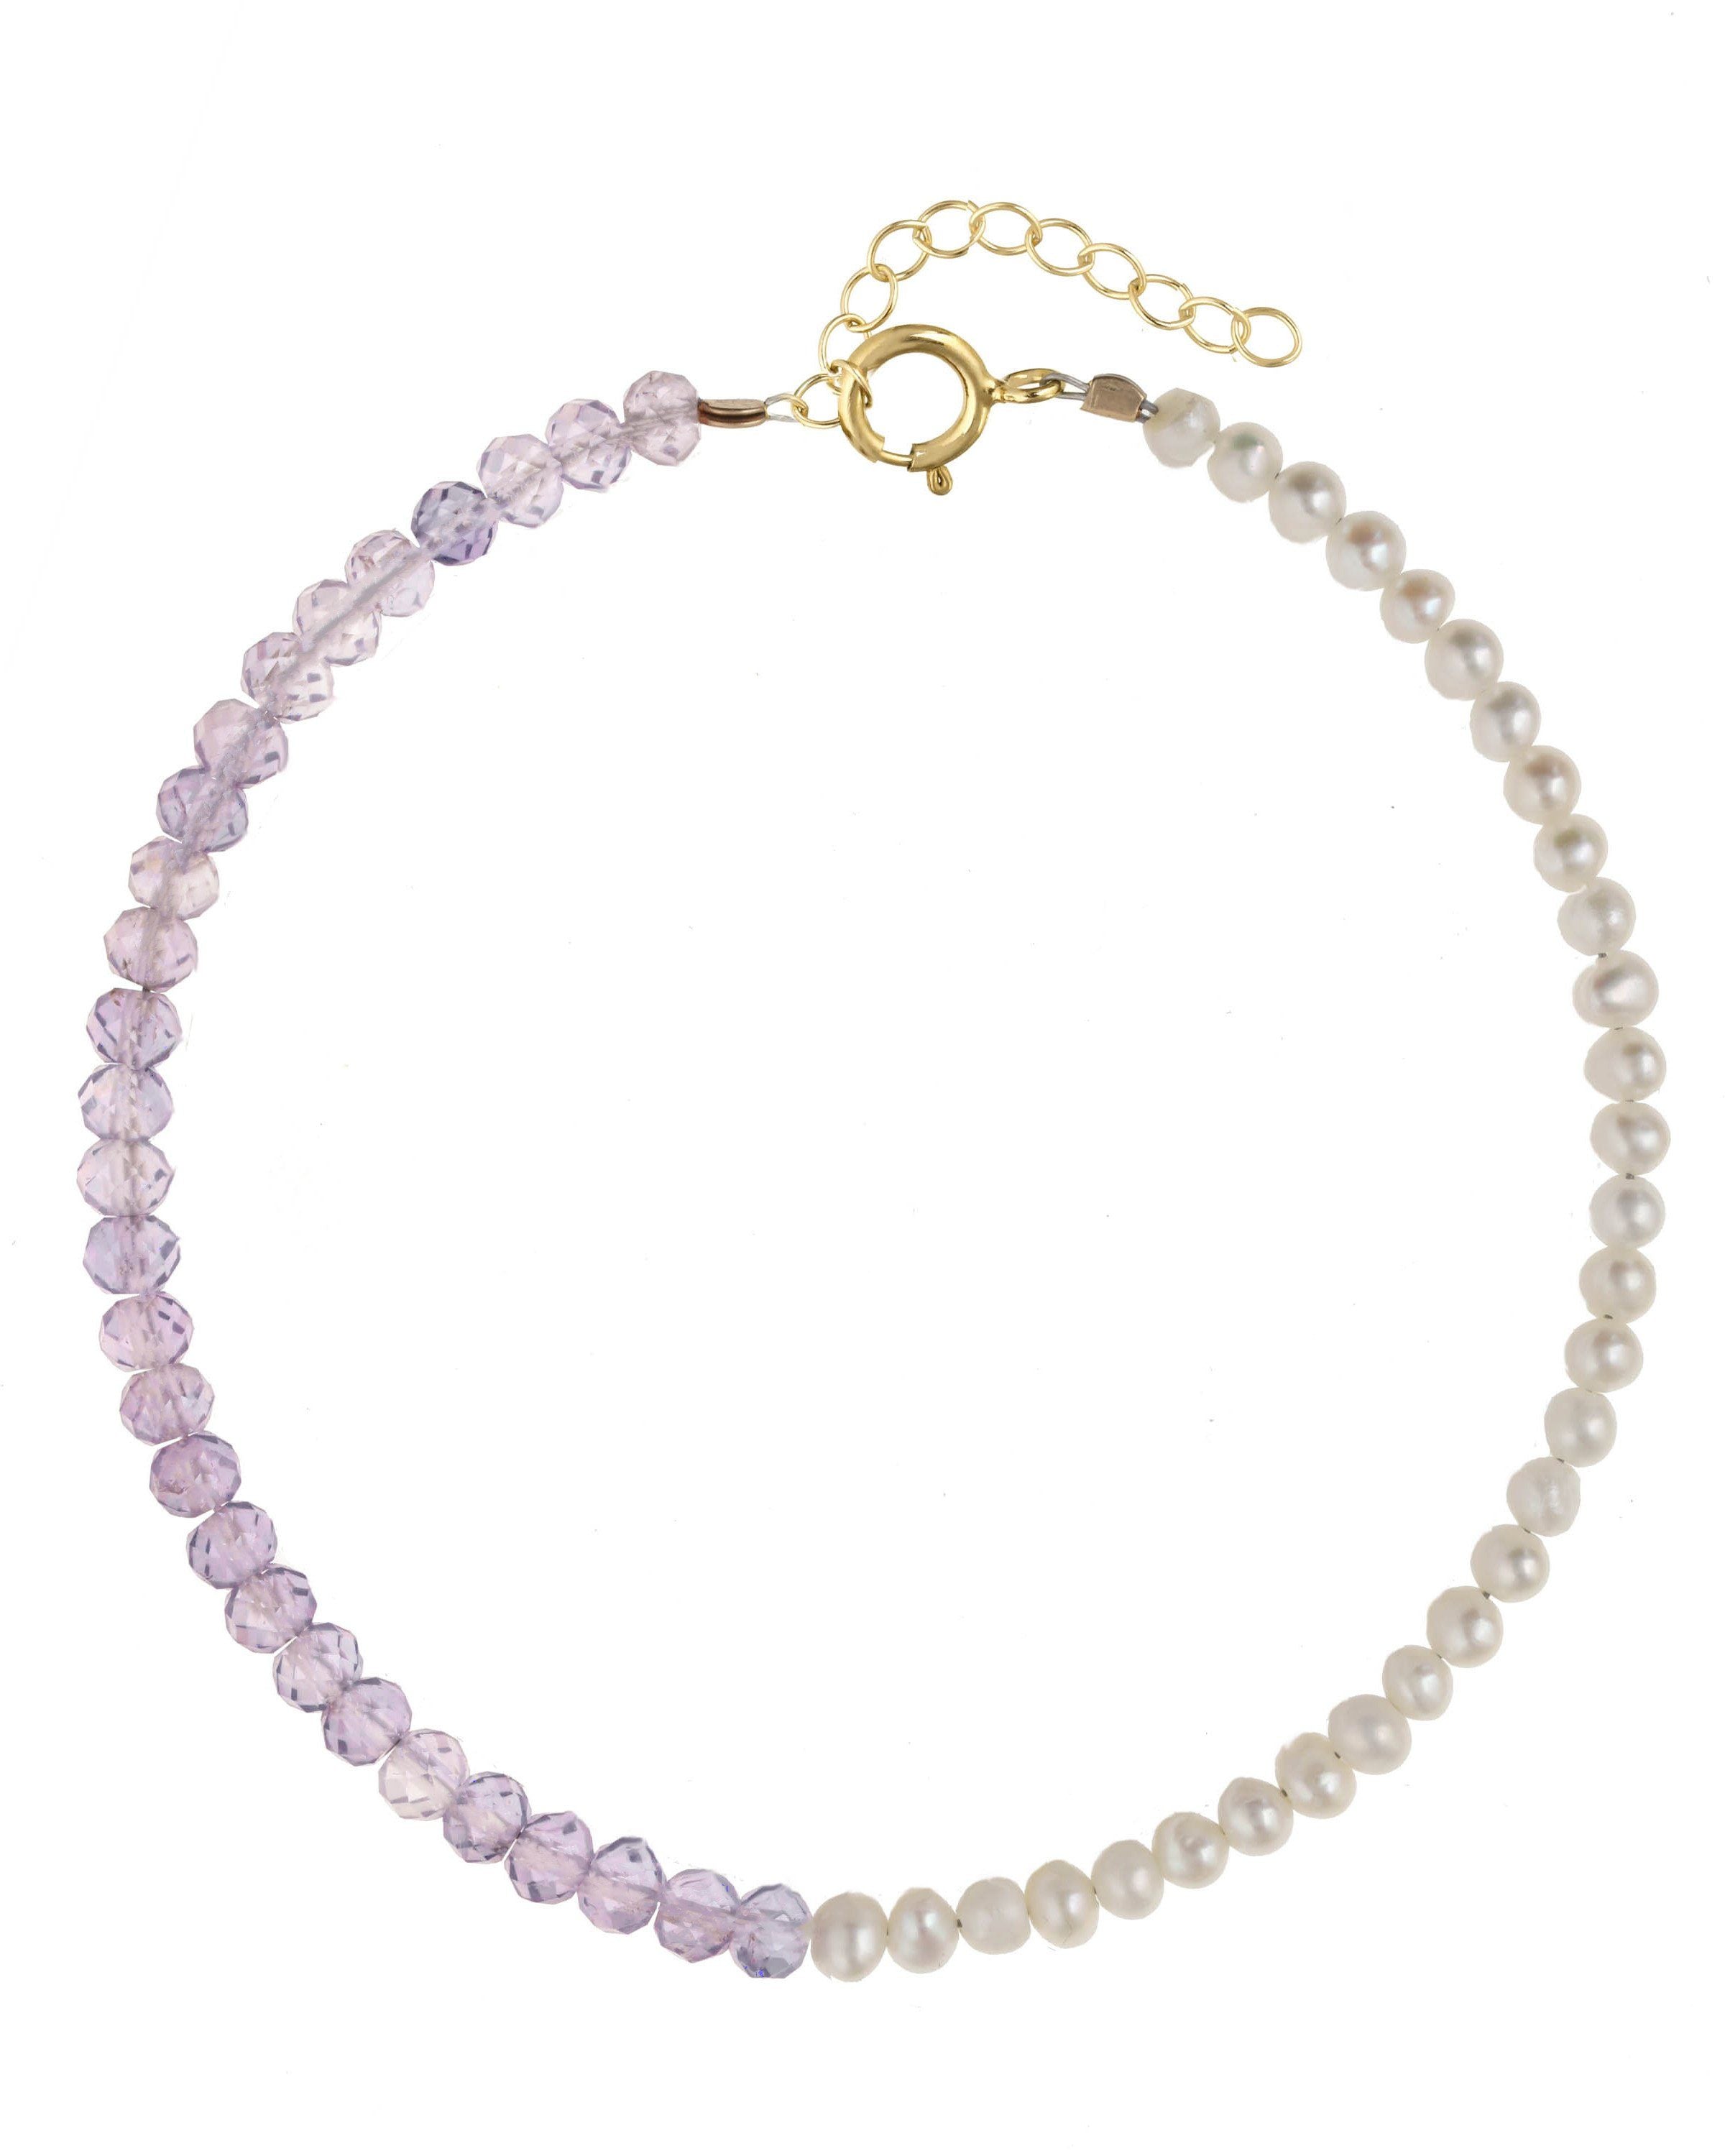 Elo Bracelet by KOZAKH. A 6 to 7 inch adjustable length bracelet, crafted in 14K Gold Filled. Half of the bracelet strand features 3.5mm Freshwater Pearls and 3.5mm Faceted Amethyst beads on the other half.